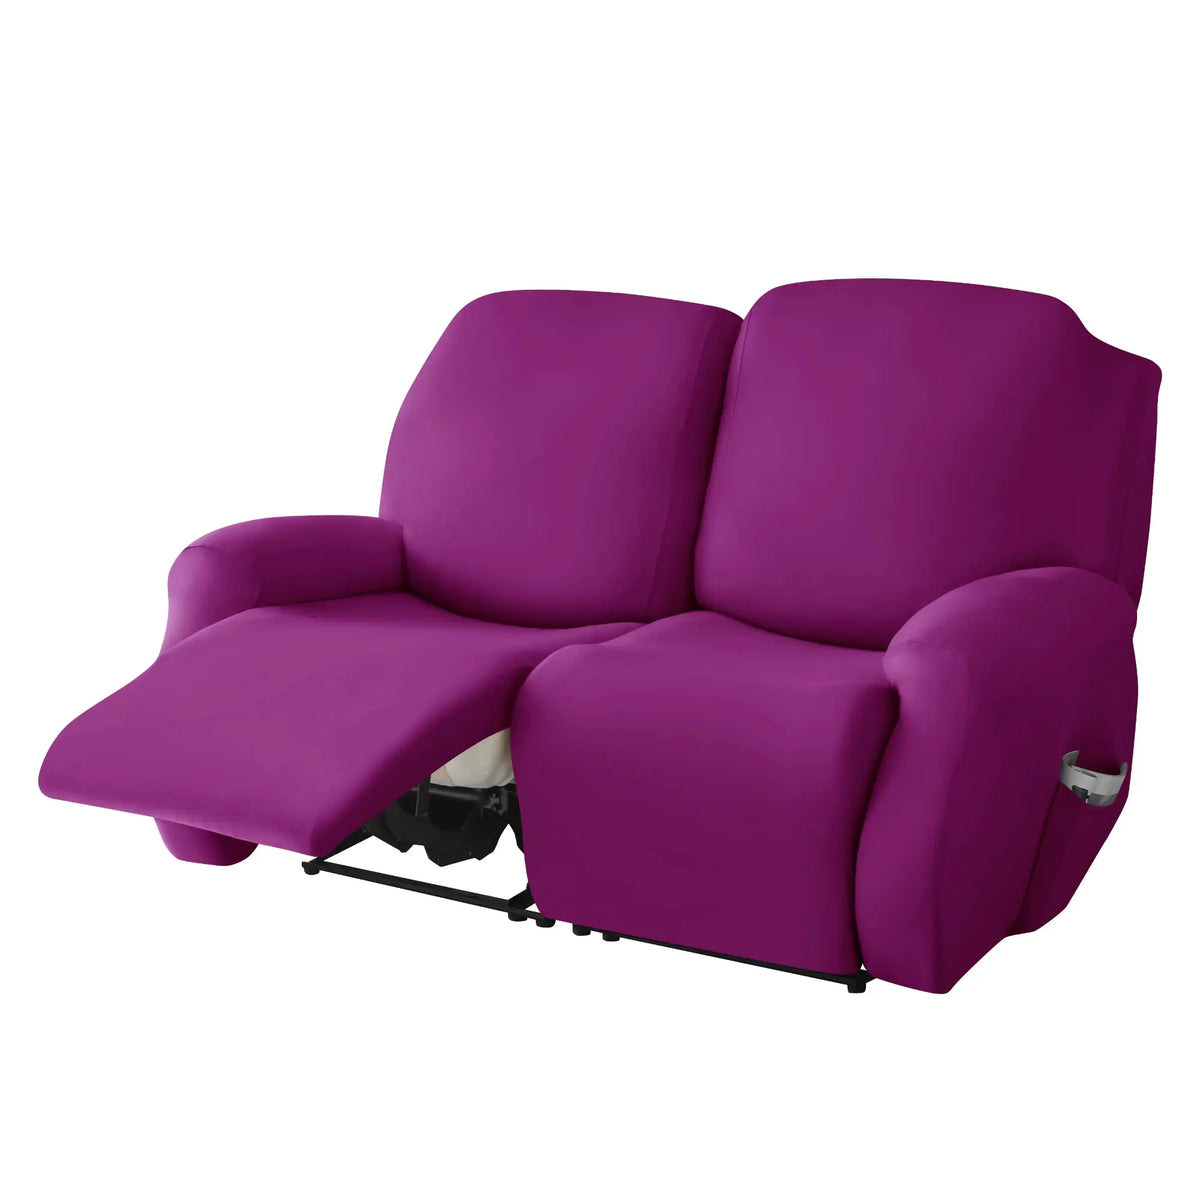 Solid Color Cover for Recliner Loveseat Crfatop %sku%